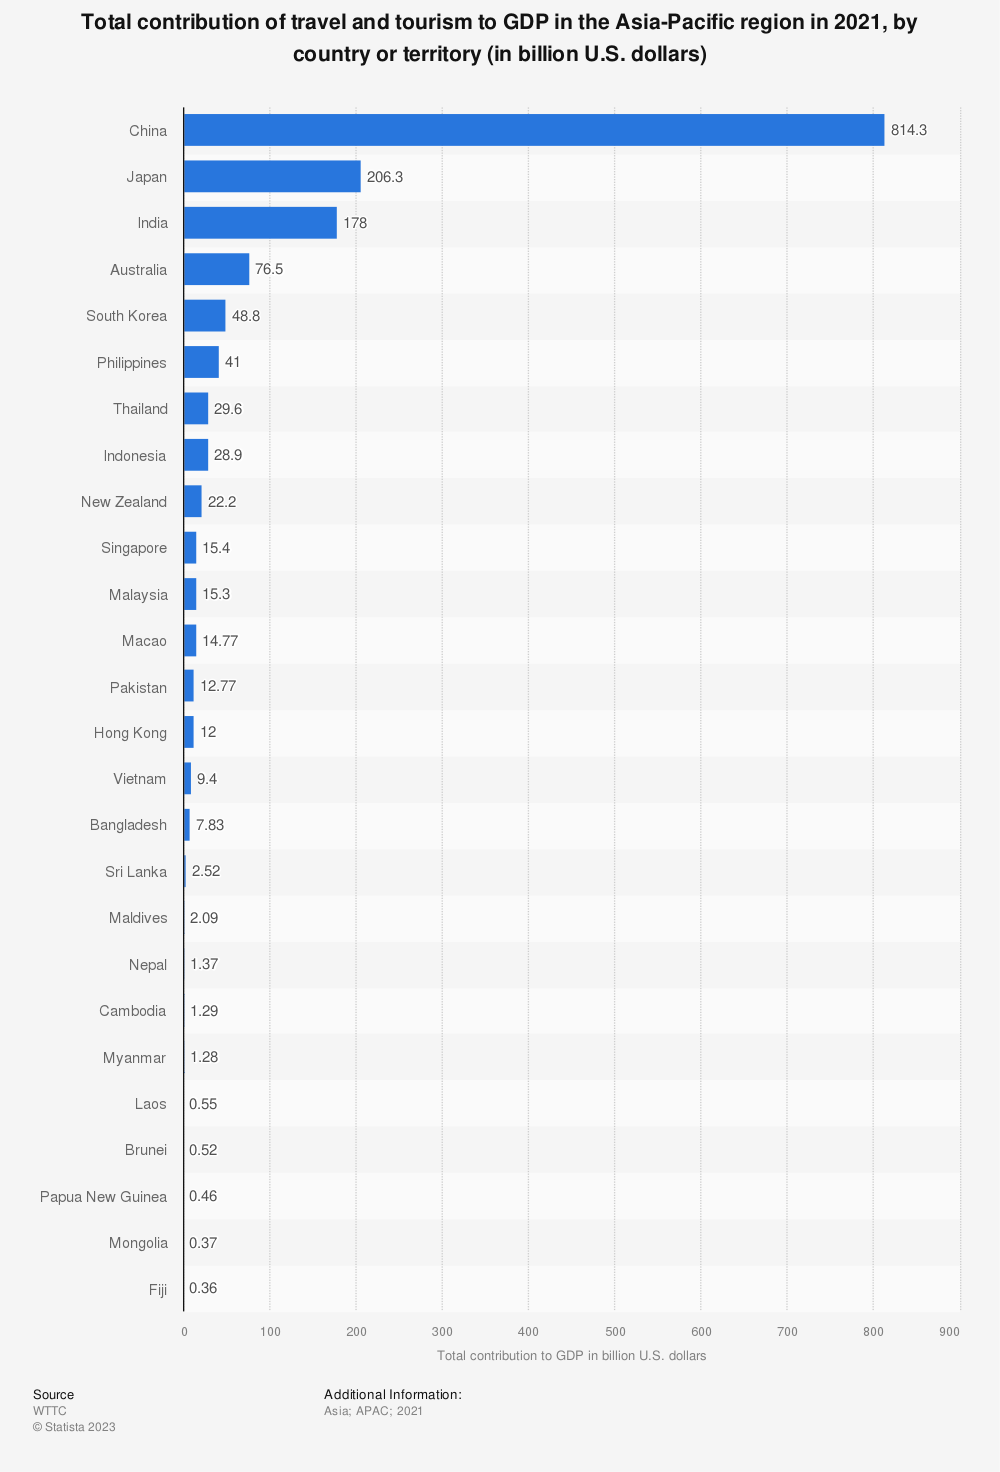 Statistic: Total contribution of travel and tourism to GDP in the Asia-Pacific region in 2021, by country or territory (in billion U.S. dollars) | Statista